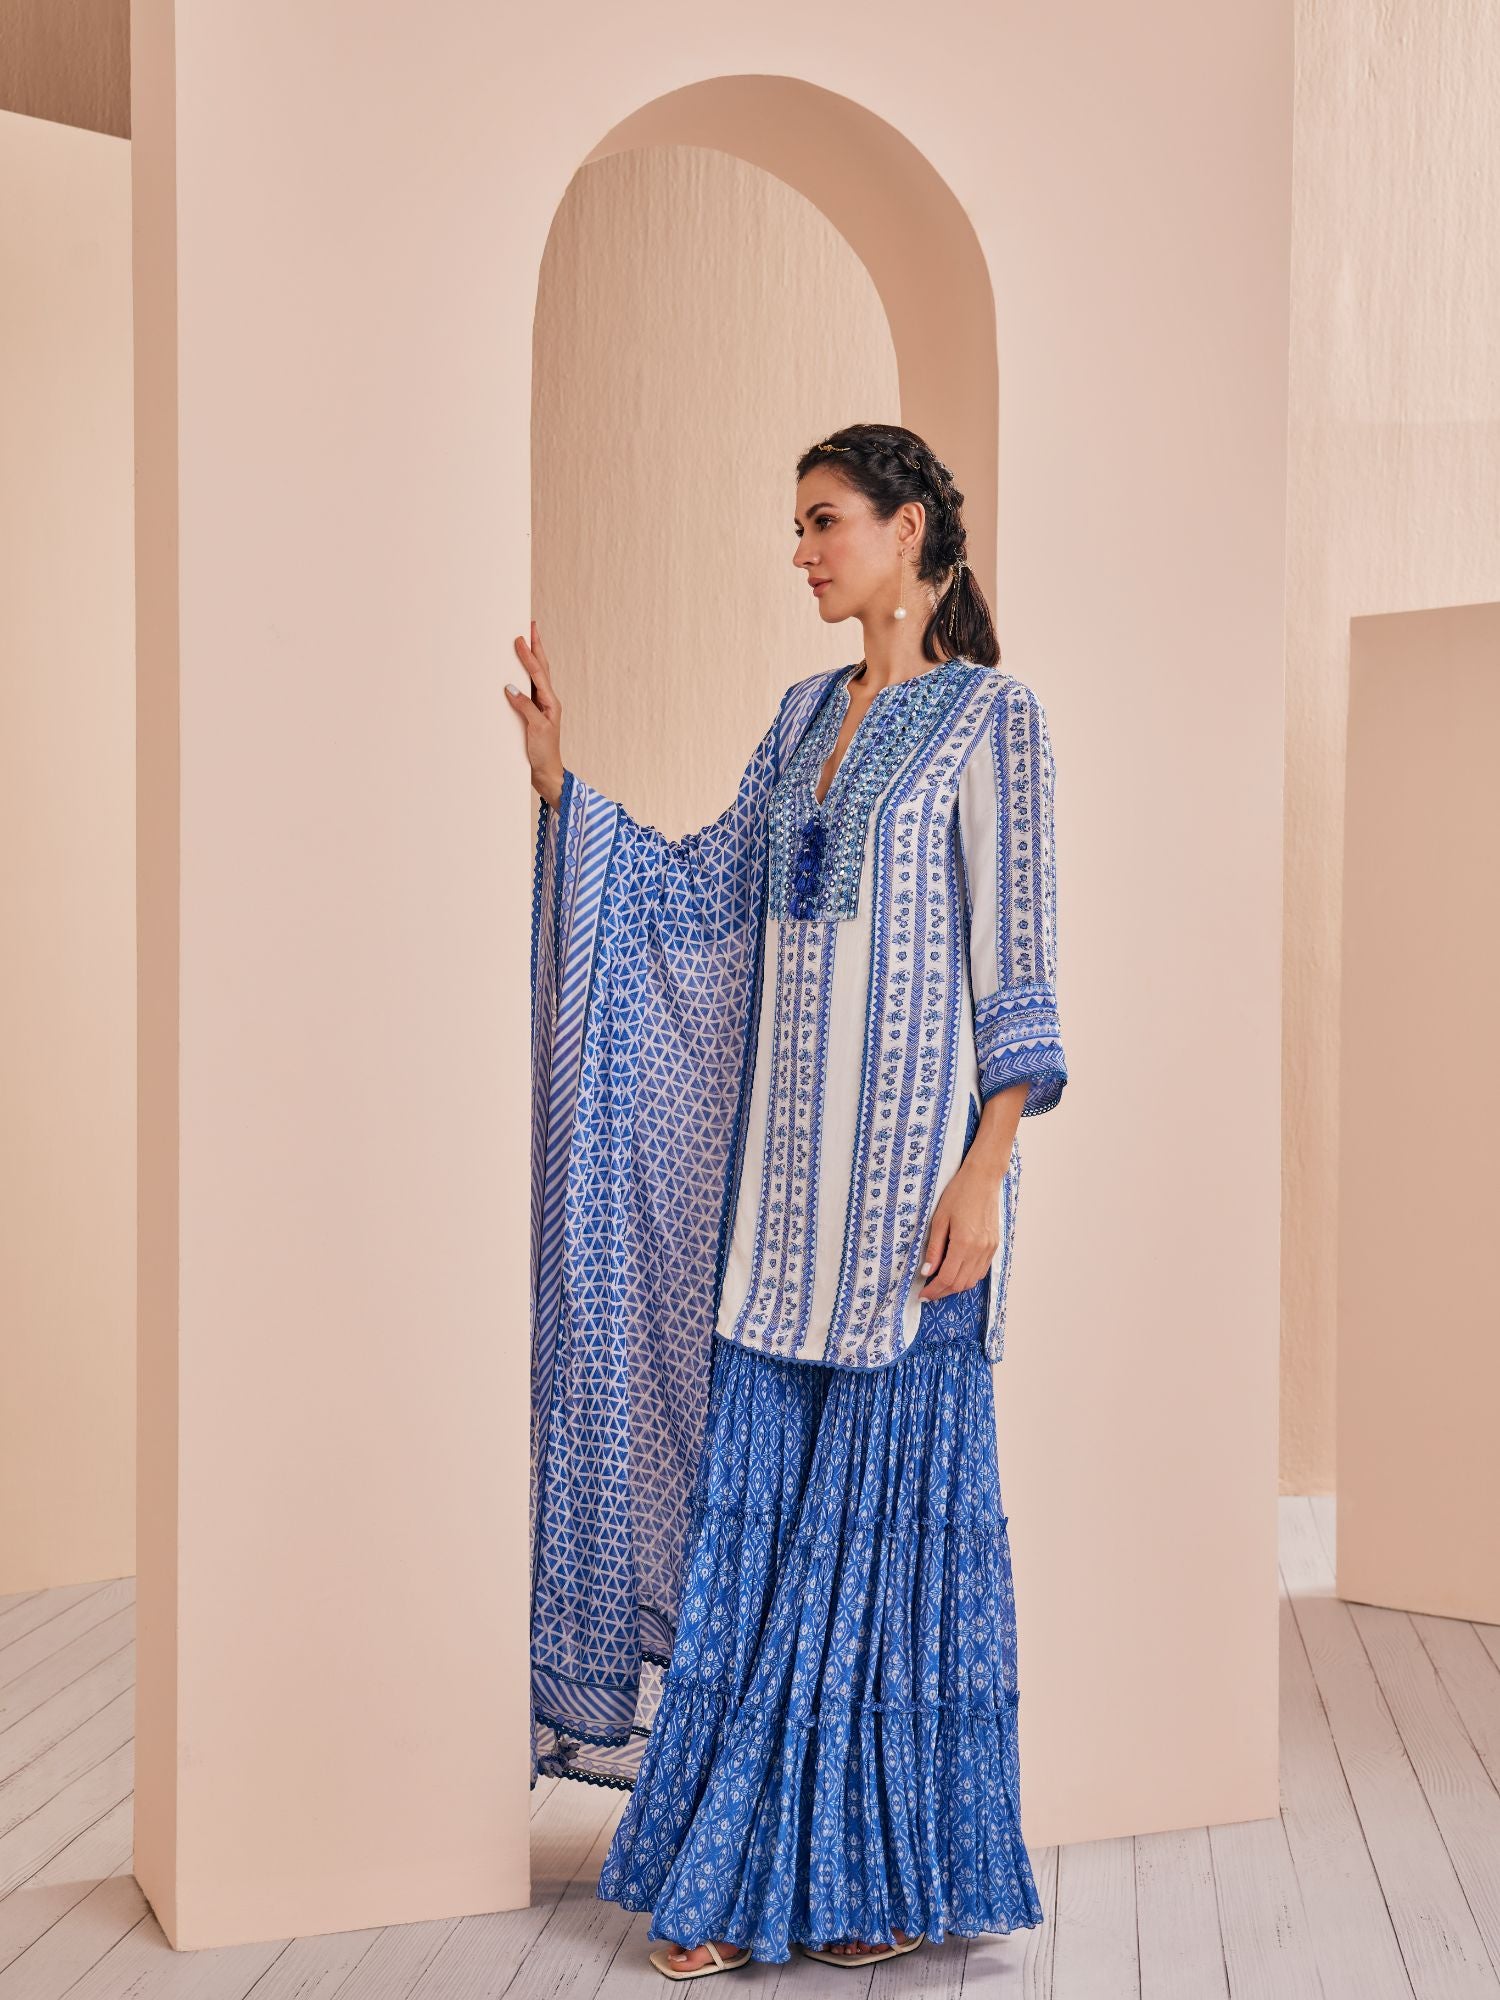 Blue perwinkle border kurta paired with tiered sharara and dupatta